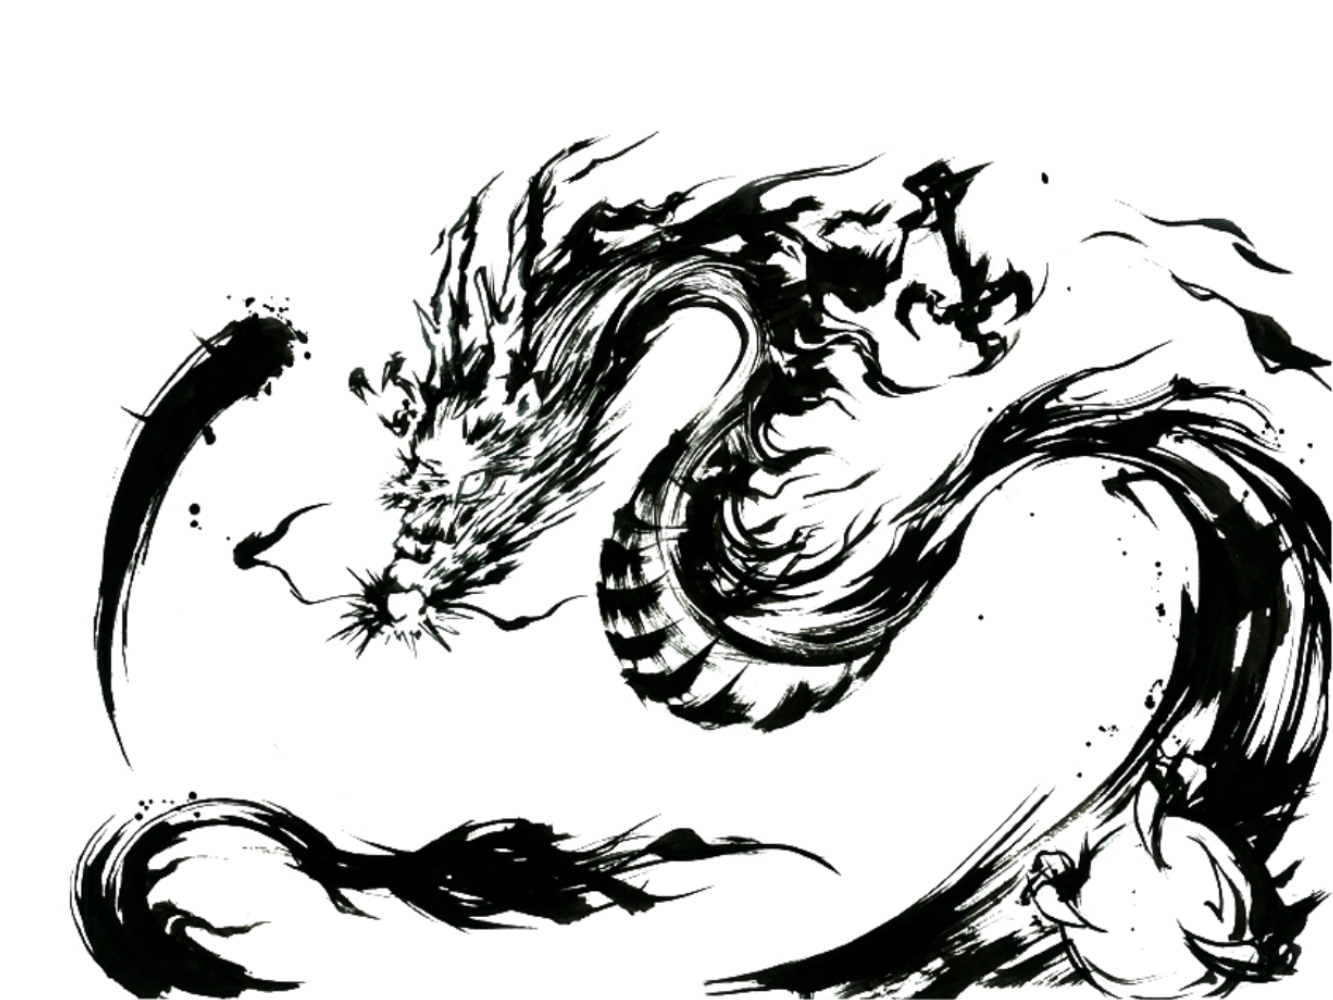 5 eventful years of the dragon in modern Japanese history - Japan Today